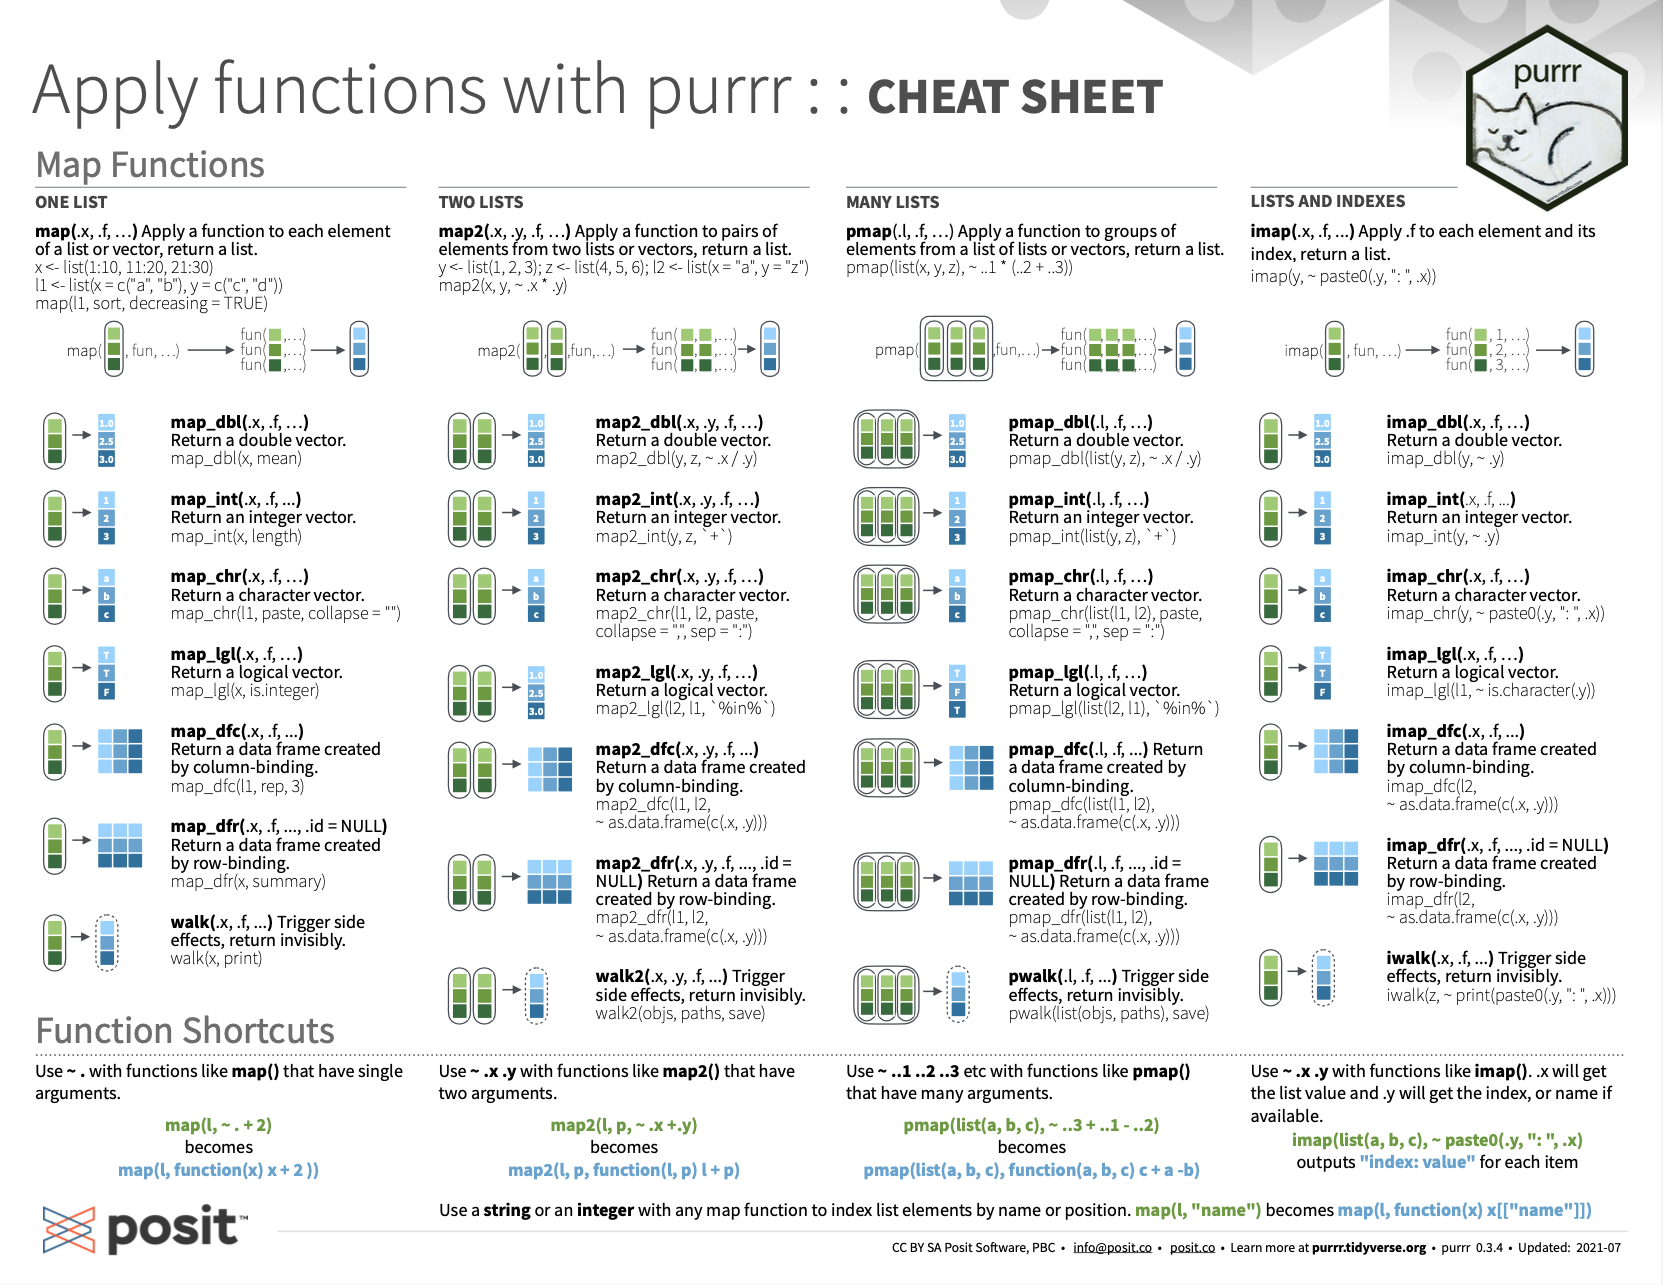 Apply functions with purrr summary from RStudio cheatsheets.